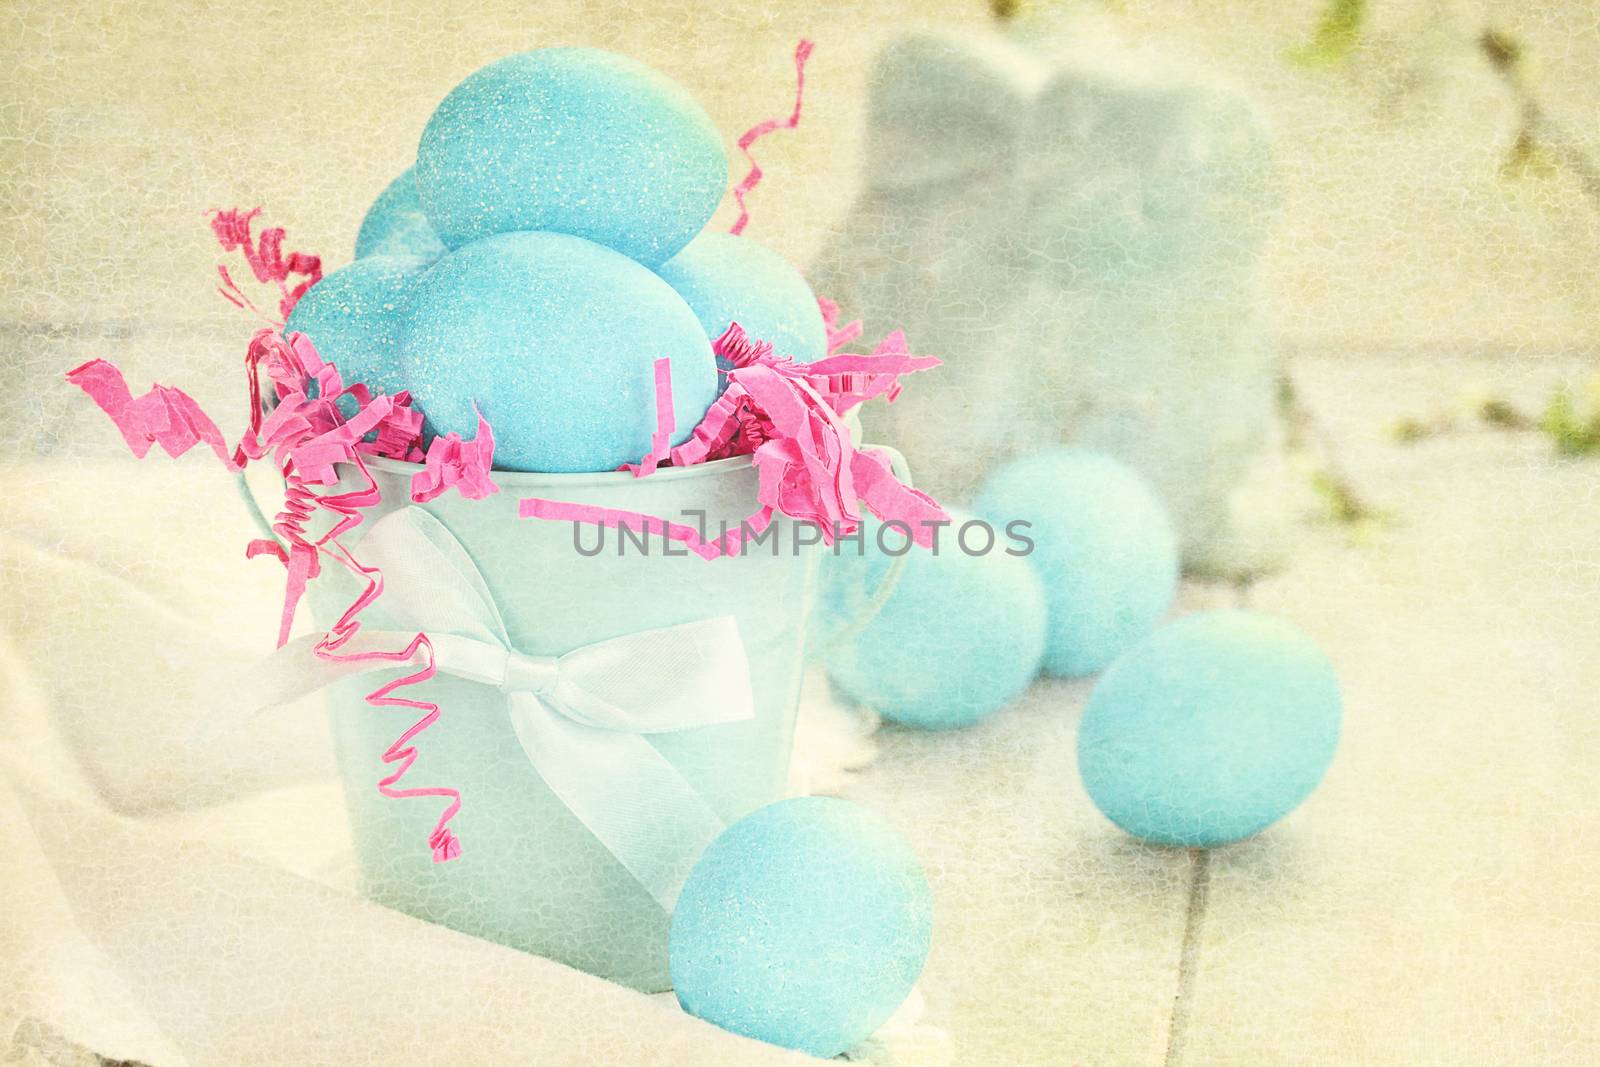 Muted textured Easter eggs in a blue tin bucket. Shallow depth of field.